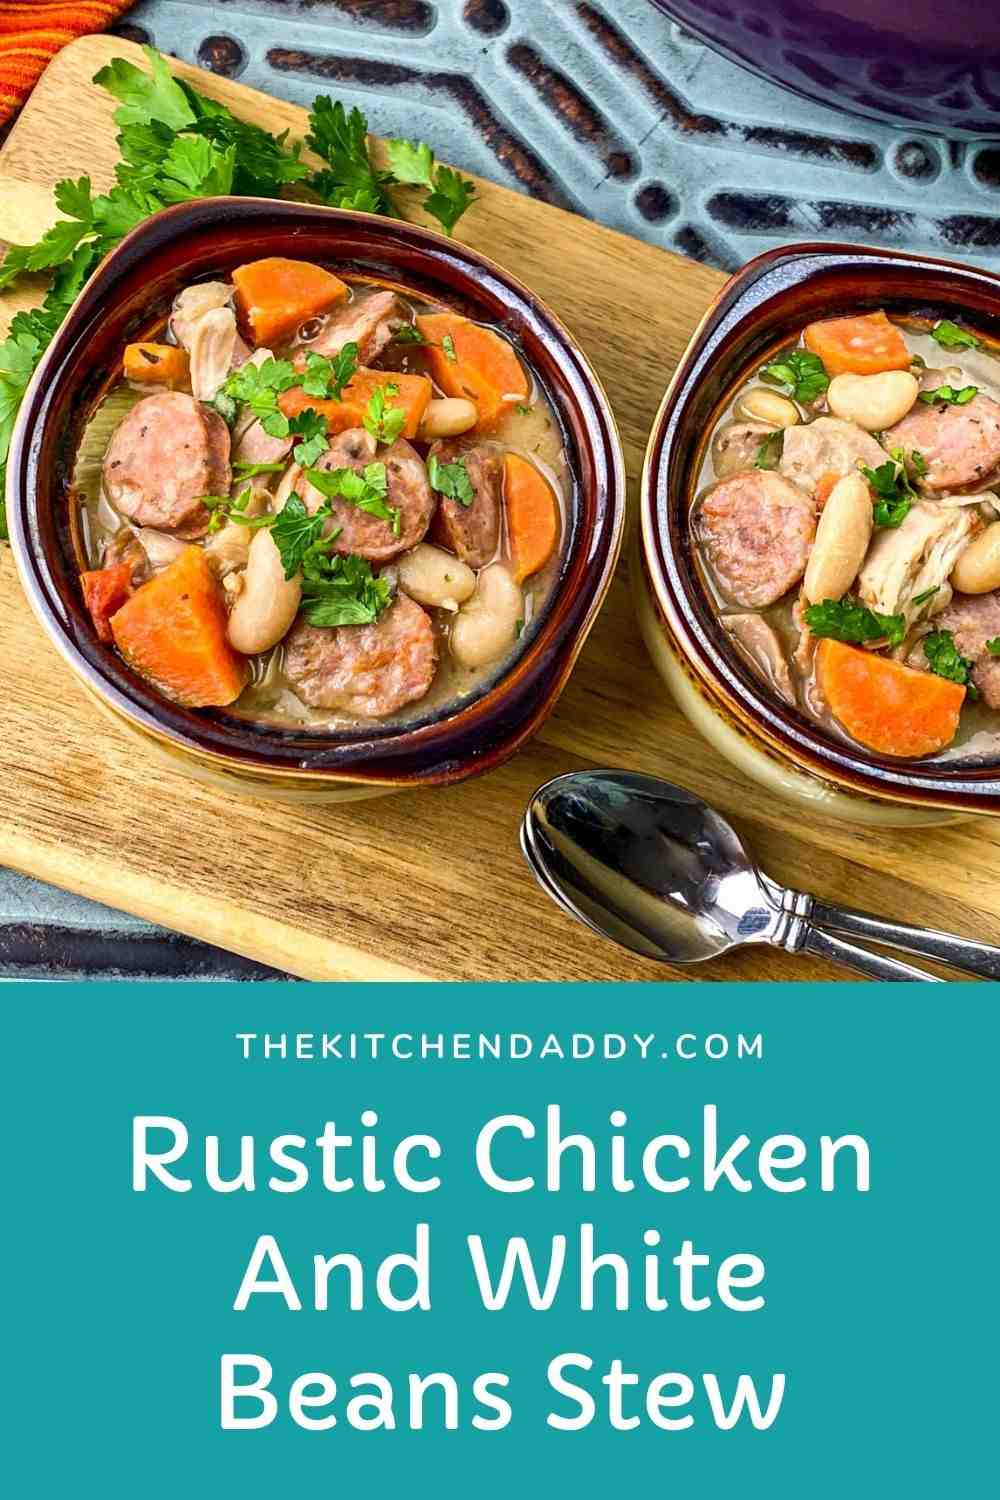 Rustic Chicken And White Beans Stew